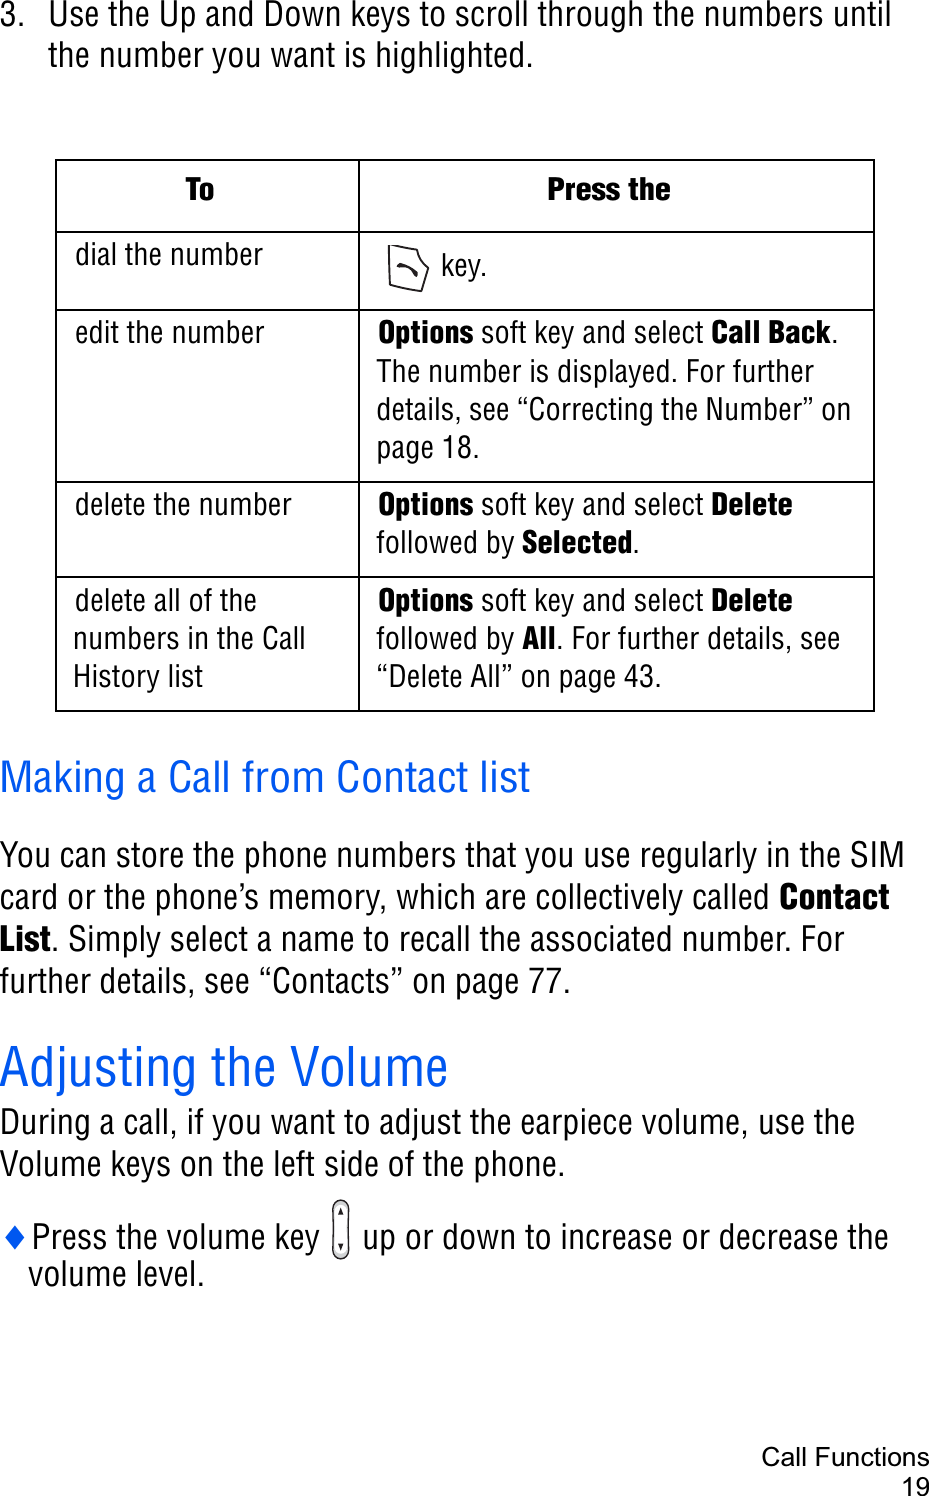 Call Functions193. Use the Up and Down keys to scroll through the numbers until the number you want is highlighted.Making a Call from Contact listYou can store the phone numbers that you use regularly in the SIM card or the phone’s memory, which are collectively called Contact List. Simply select a name to recall the associated number. For further details, see “Contacts” on page 77.Adjusting the VolumeDuring a call, if you want to adjust the earpiece volume, use the Volume keys on the left side of the phone.iPress the volume key   up or down to increase or decrease the volume level.To Press thedial the number  key.edit the number Options soft key and select Call Back.The number is displayed. For further details, see “Correcting the Number” on page 18. delete the number Options soft key and select Deletefollowed by Selected.delete all of the numbers in the Call History list Options soft key and select Deletefollowed by All. For further details, see “Delete All” on page 43.